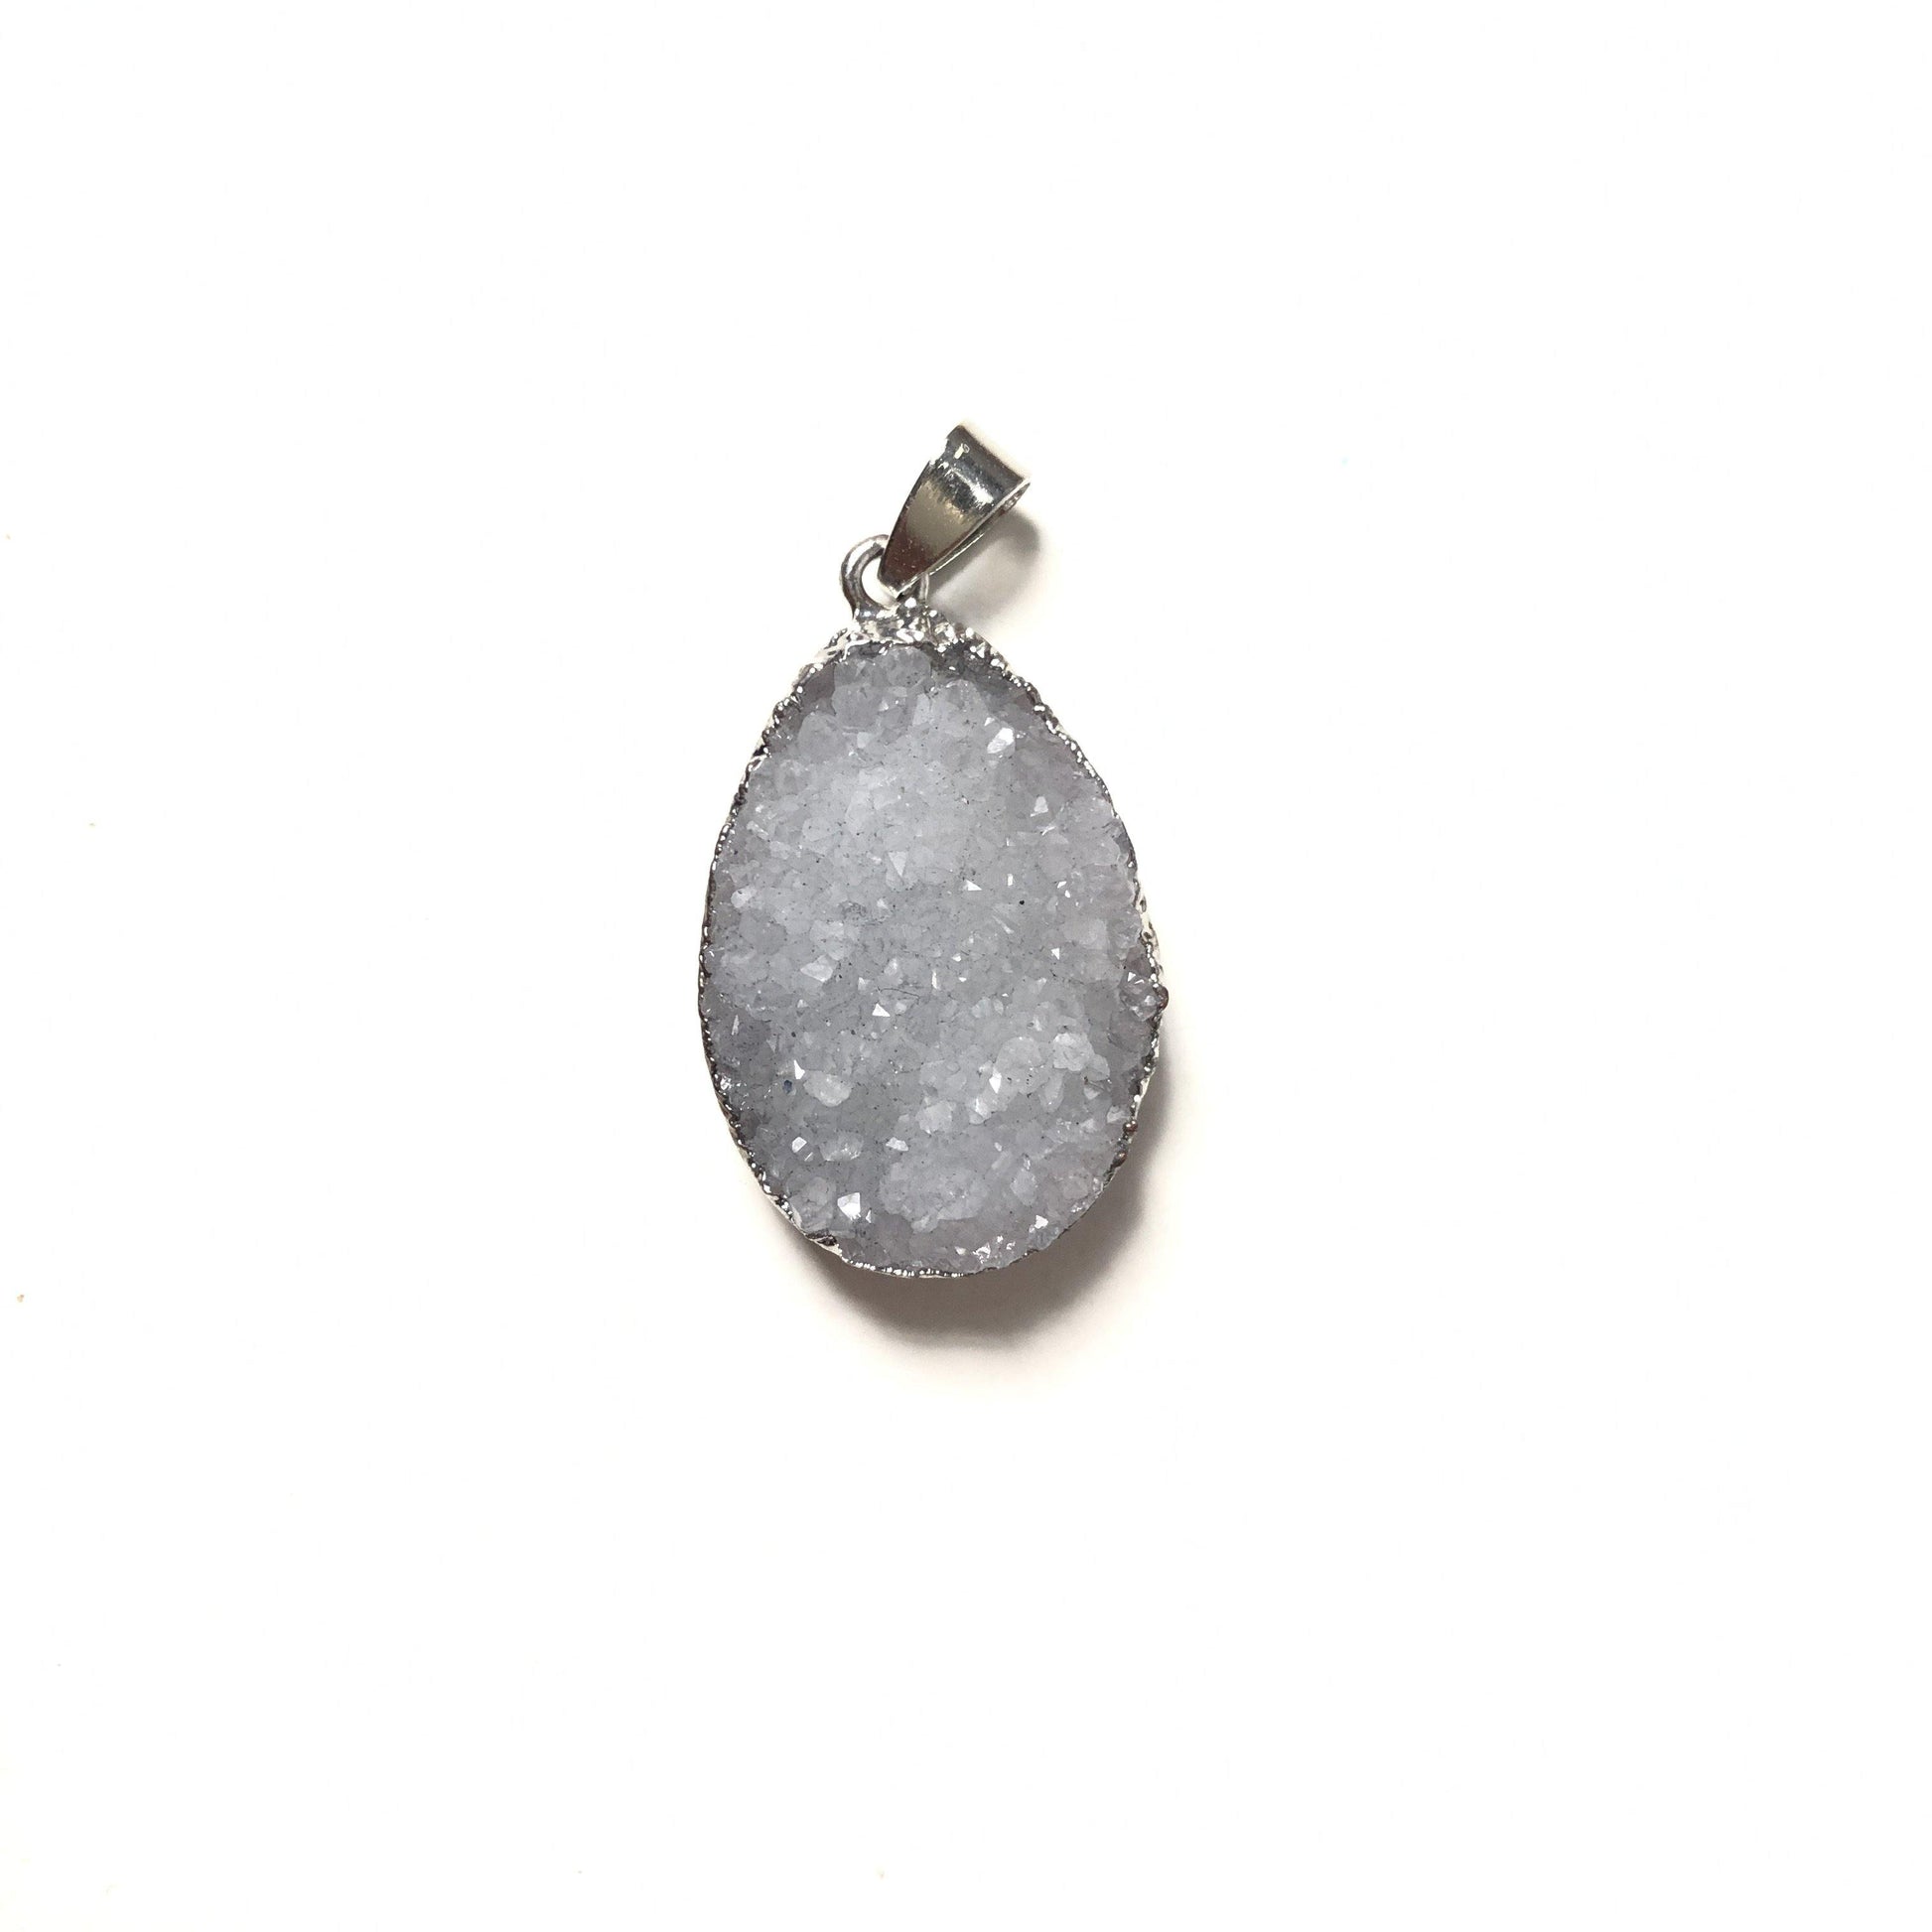 5pcs/lot 30*22mm Waterdrop Shape Natural Agate Druzy Charm-Silver Grey on Silver Stone Charms Charms Beads Beyond